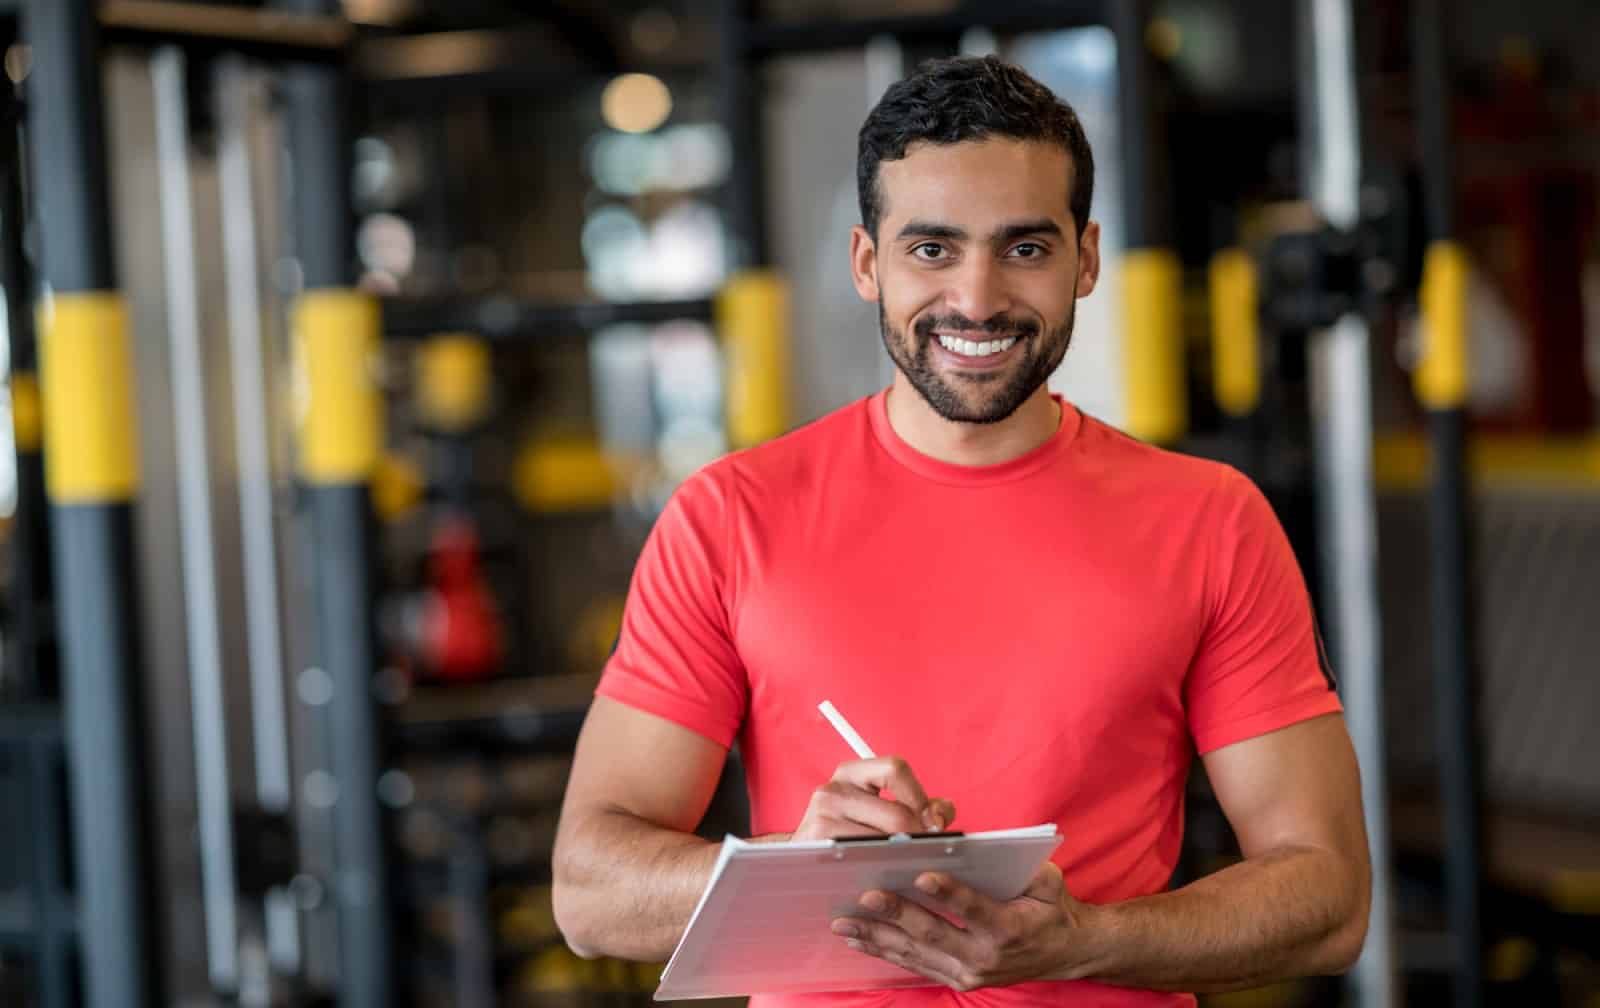 Three Ways To Prevent Gym Members From Having To Freeze Their Memberships